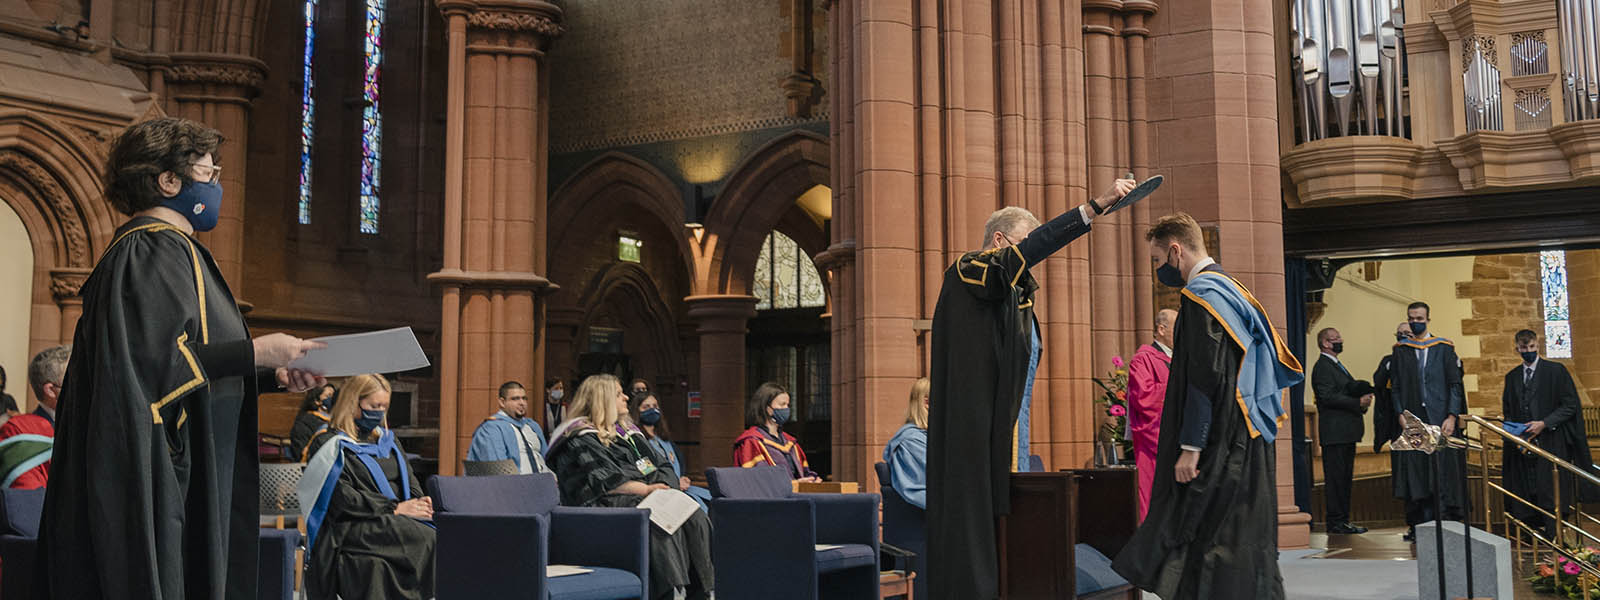 Student on stage at Graduation ceremony inside the Barony Hall.